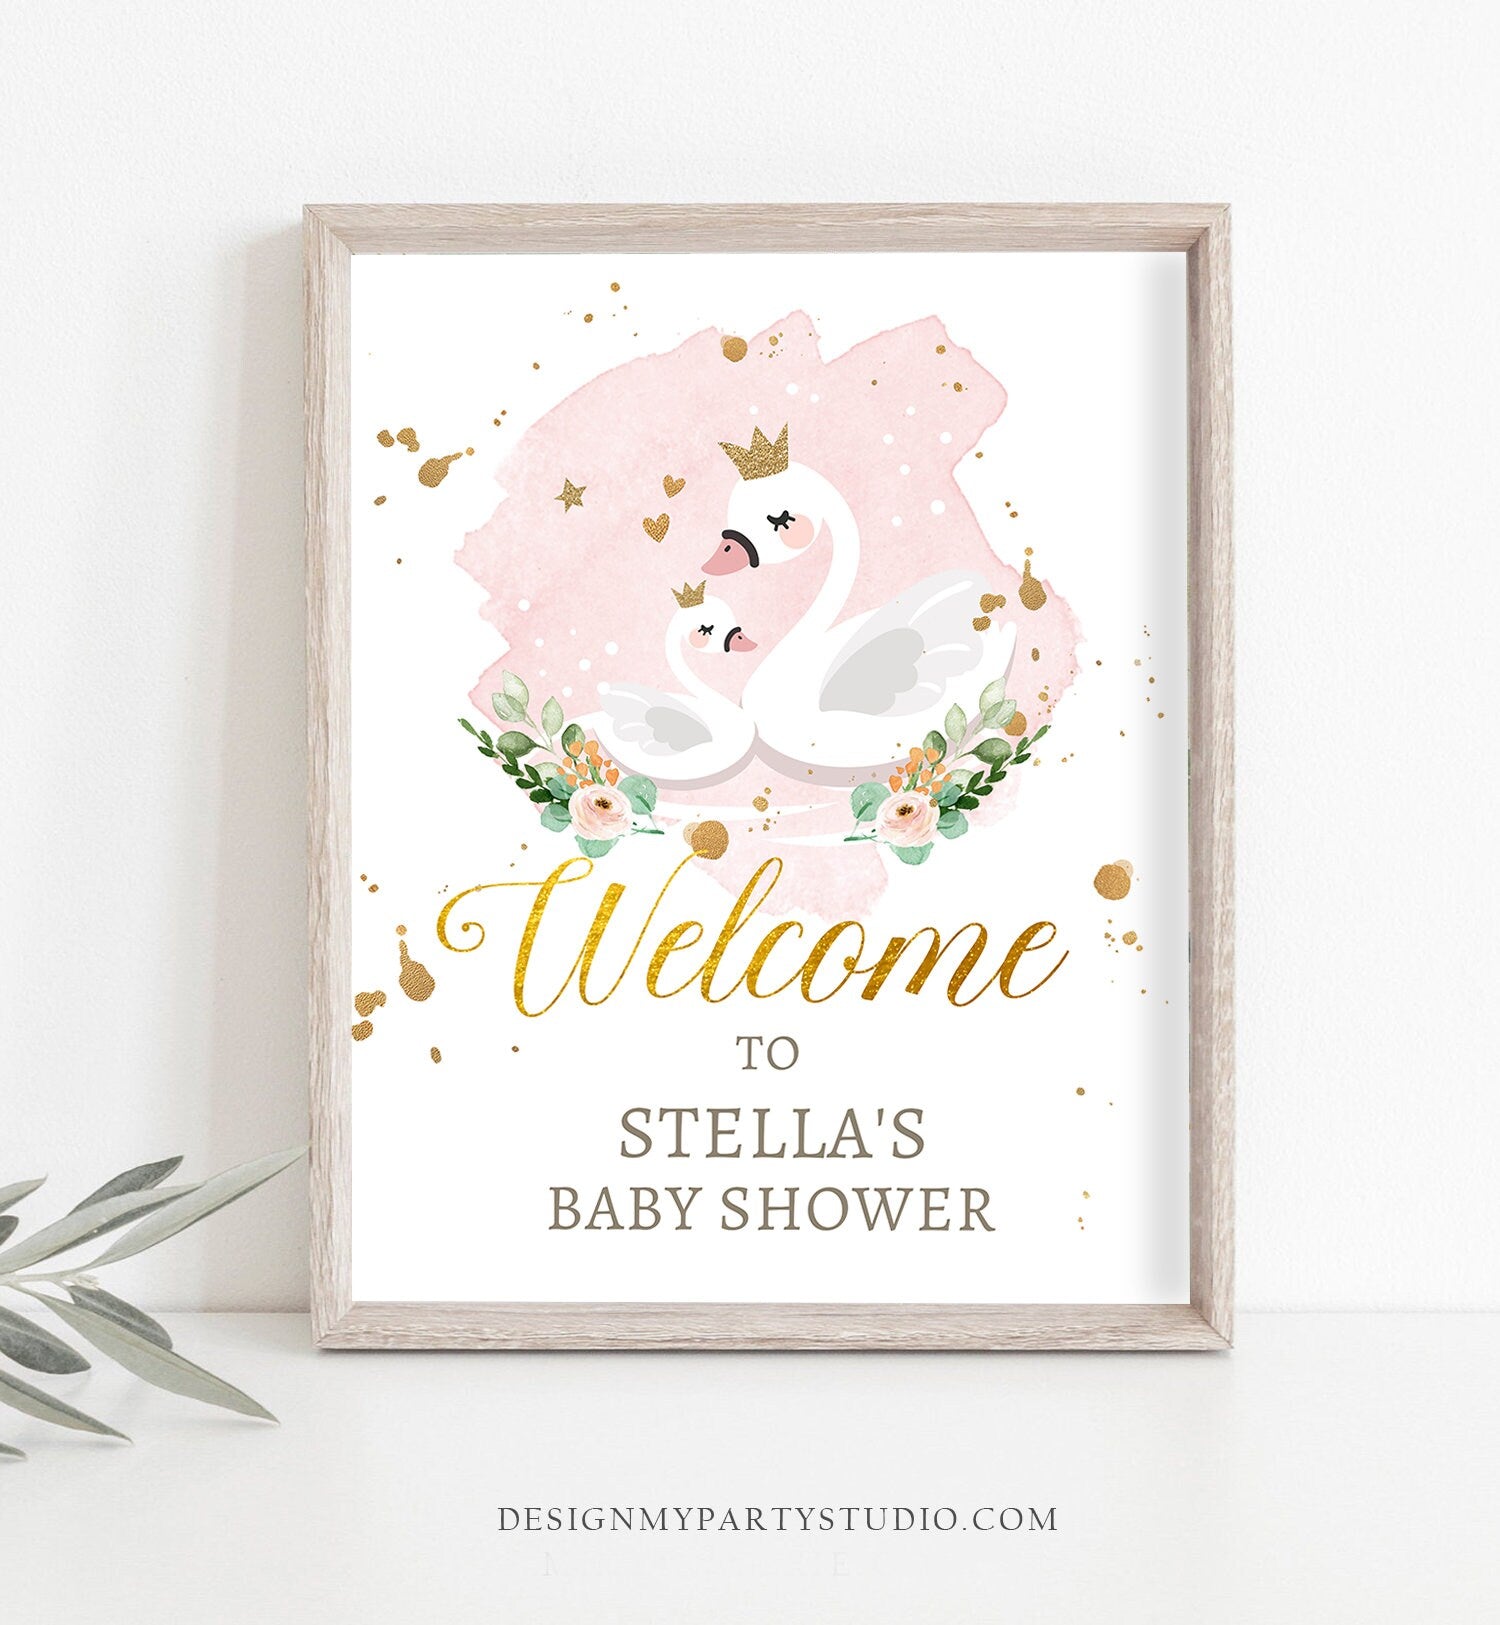 Editable Swan Baby Shower Welcome Sign Swan Welcome Princess Girl Shower Blush Pink Gold Floral Swan Decor Template Corjl PRINTABLE 0382